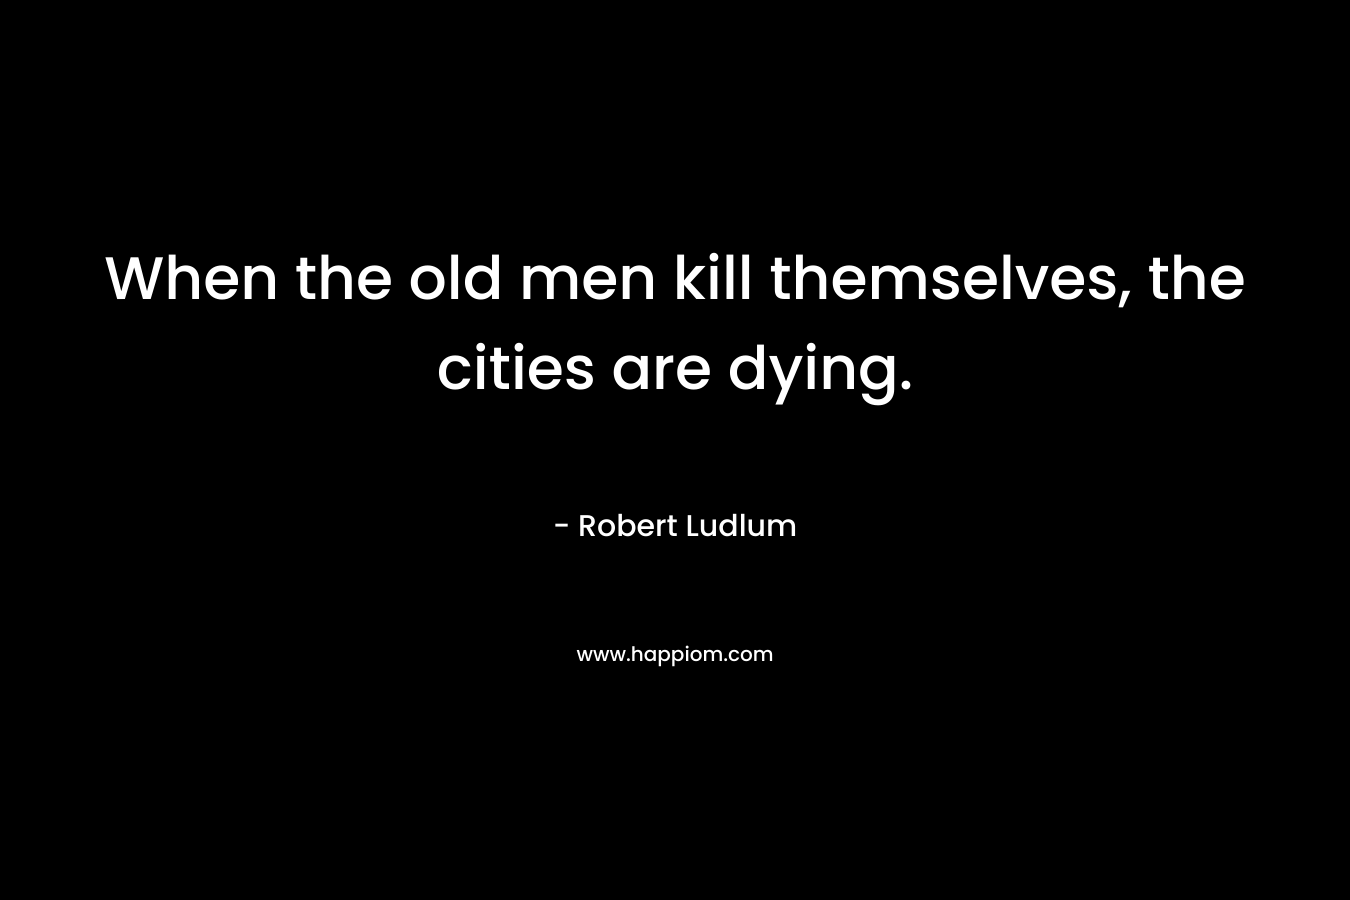 When the old men kill themselves, the cities are dying. – Robert Ludlum